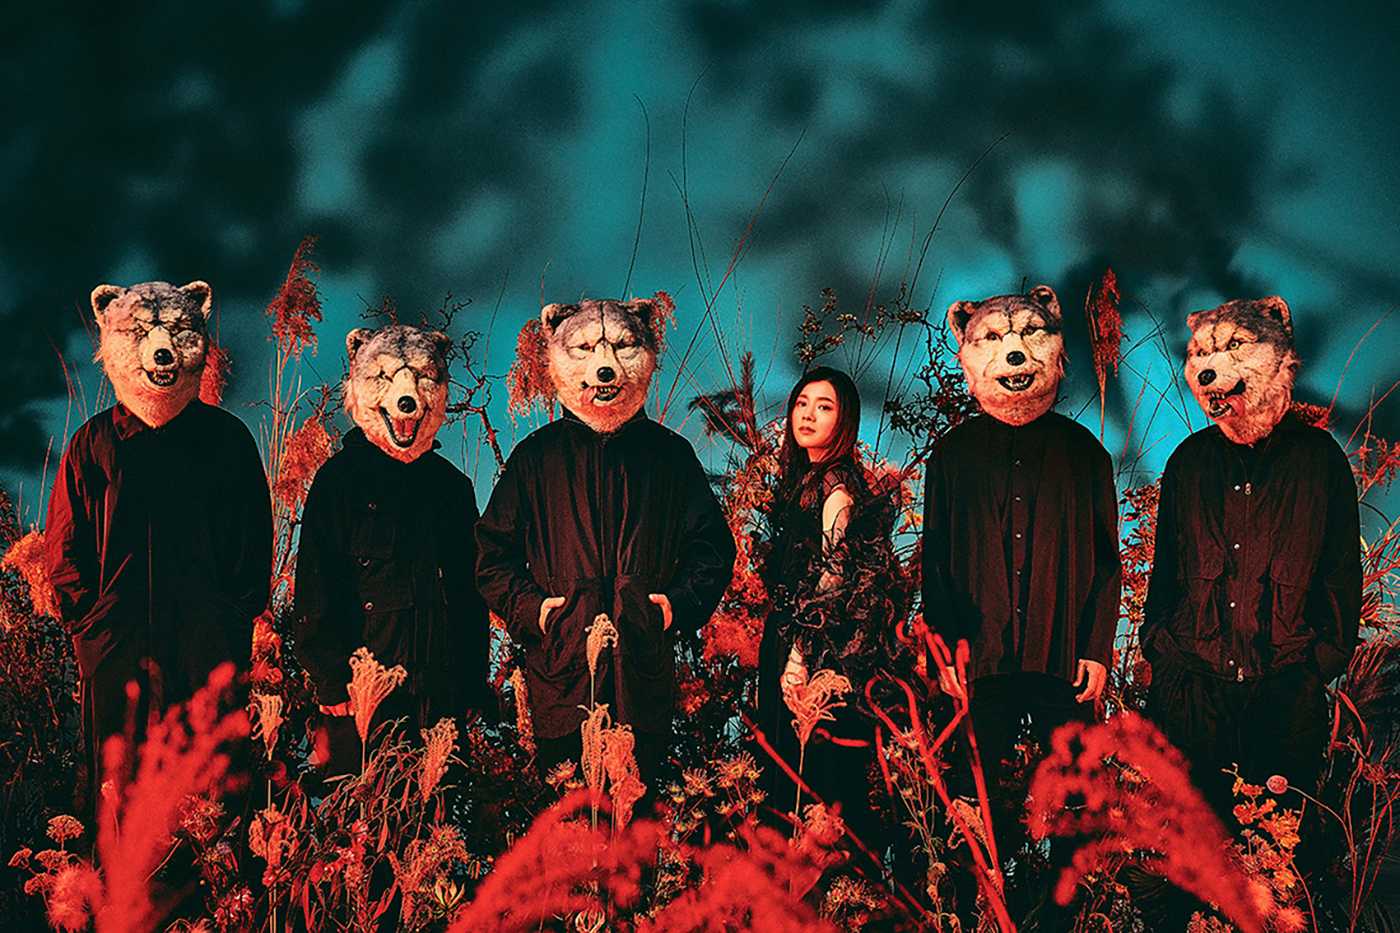 MAN WITH A MISSION×milet、コラボ曲「絆ノ奇跡」が『テレビアニメ「鬼滅の刃」刀鍛冶の里編』のOP主題歌に決定 - 画像一覧（2/2）